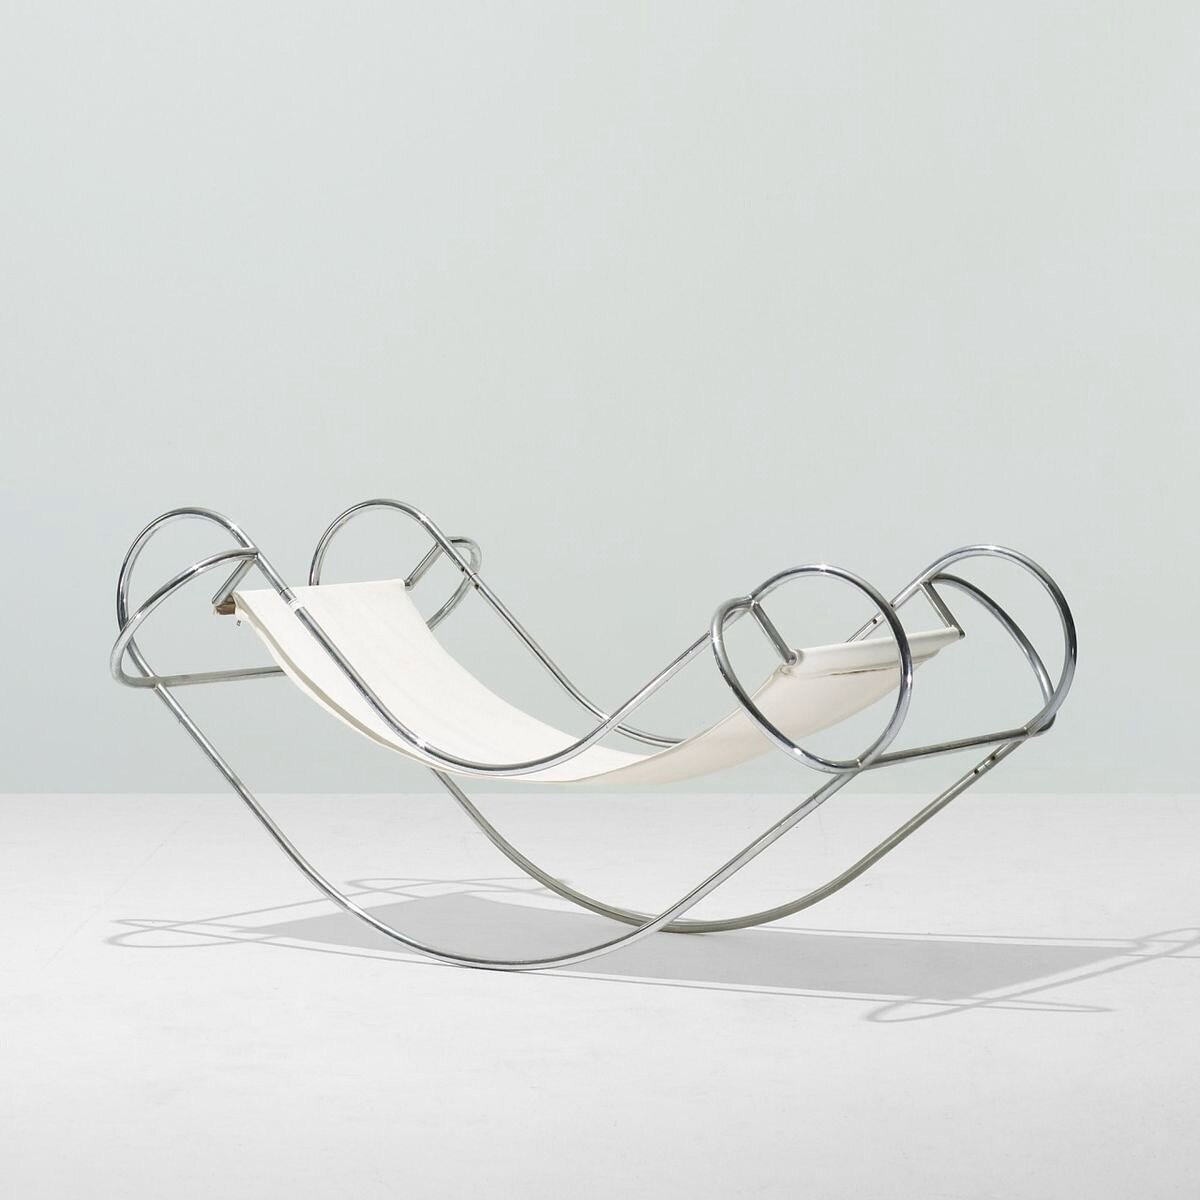 Sym&eacute;trique Rocking Chair by #JeanMichelSanejouand, 1971